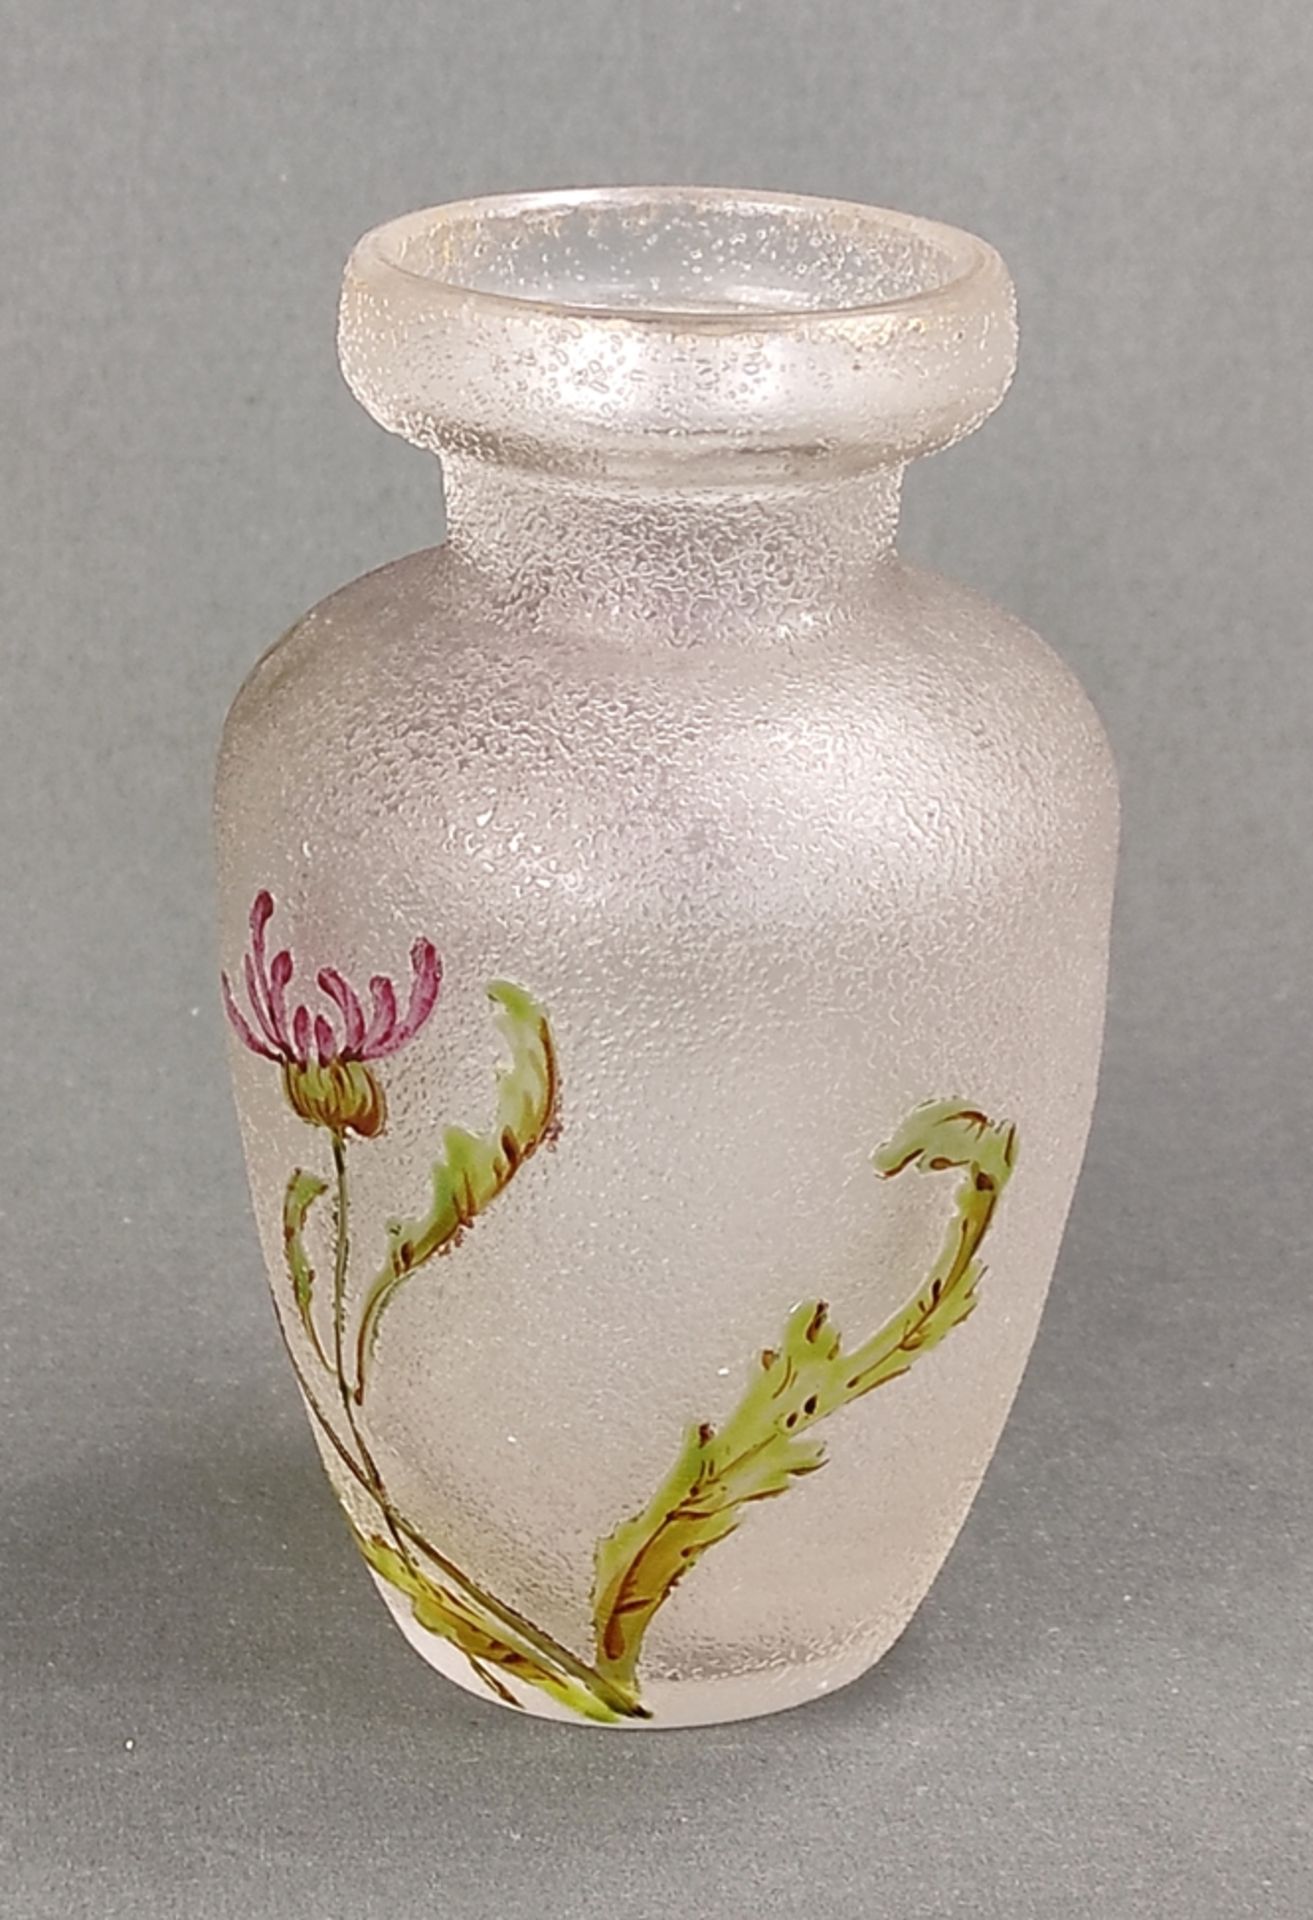 Choisy Le Roi Vase, transparent glass with floral decoration, height 13cm - Image 2 of 3